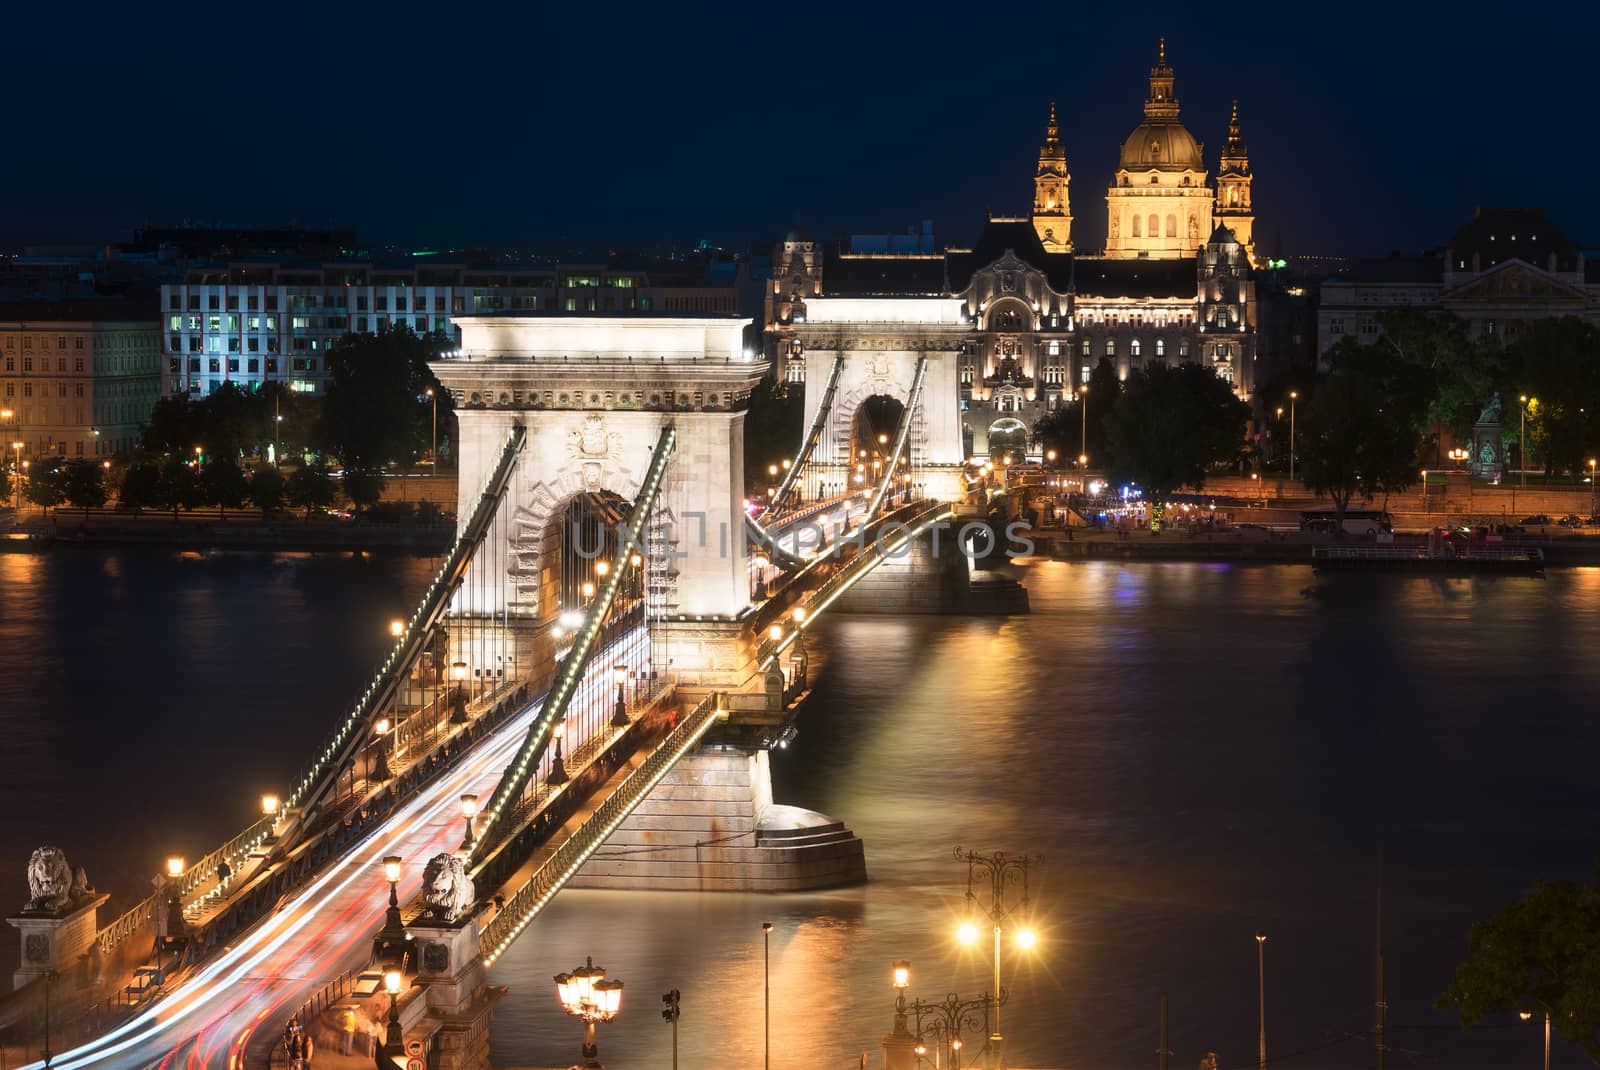 Szechenyi Chain Bridge in Budapest Hungary by adonis_abril